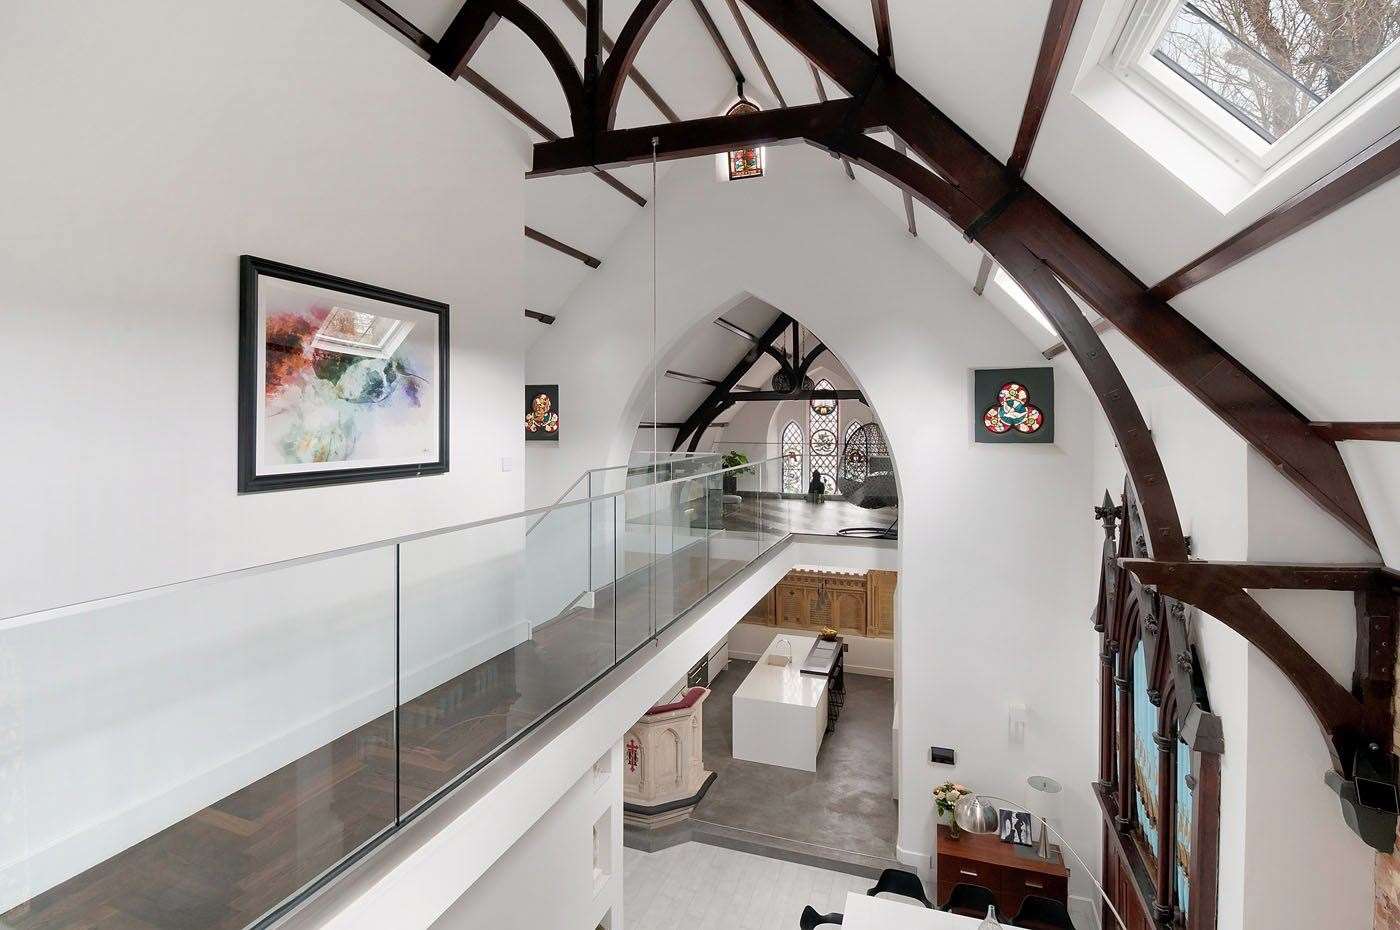 A glass mezzanine provides a brilliant view of the downstairs area